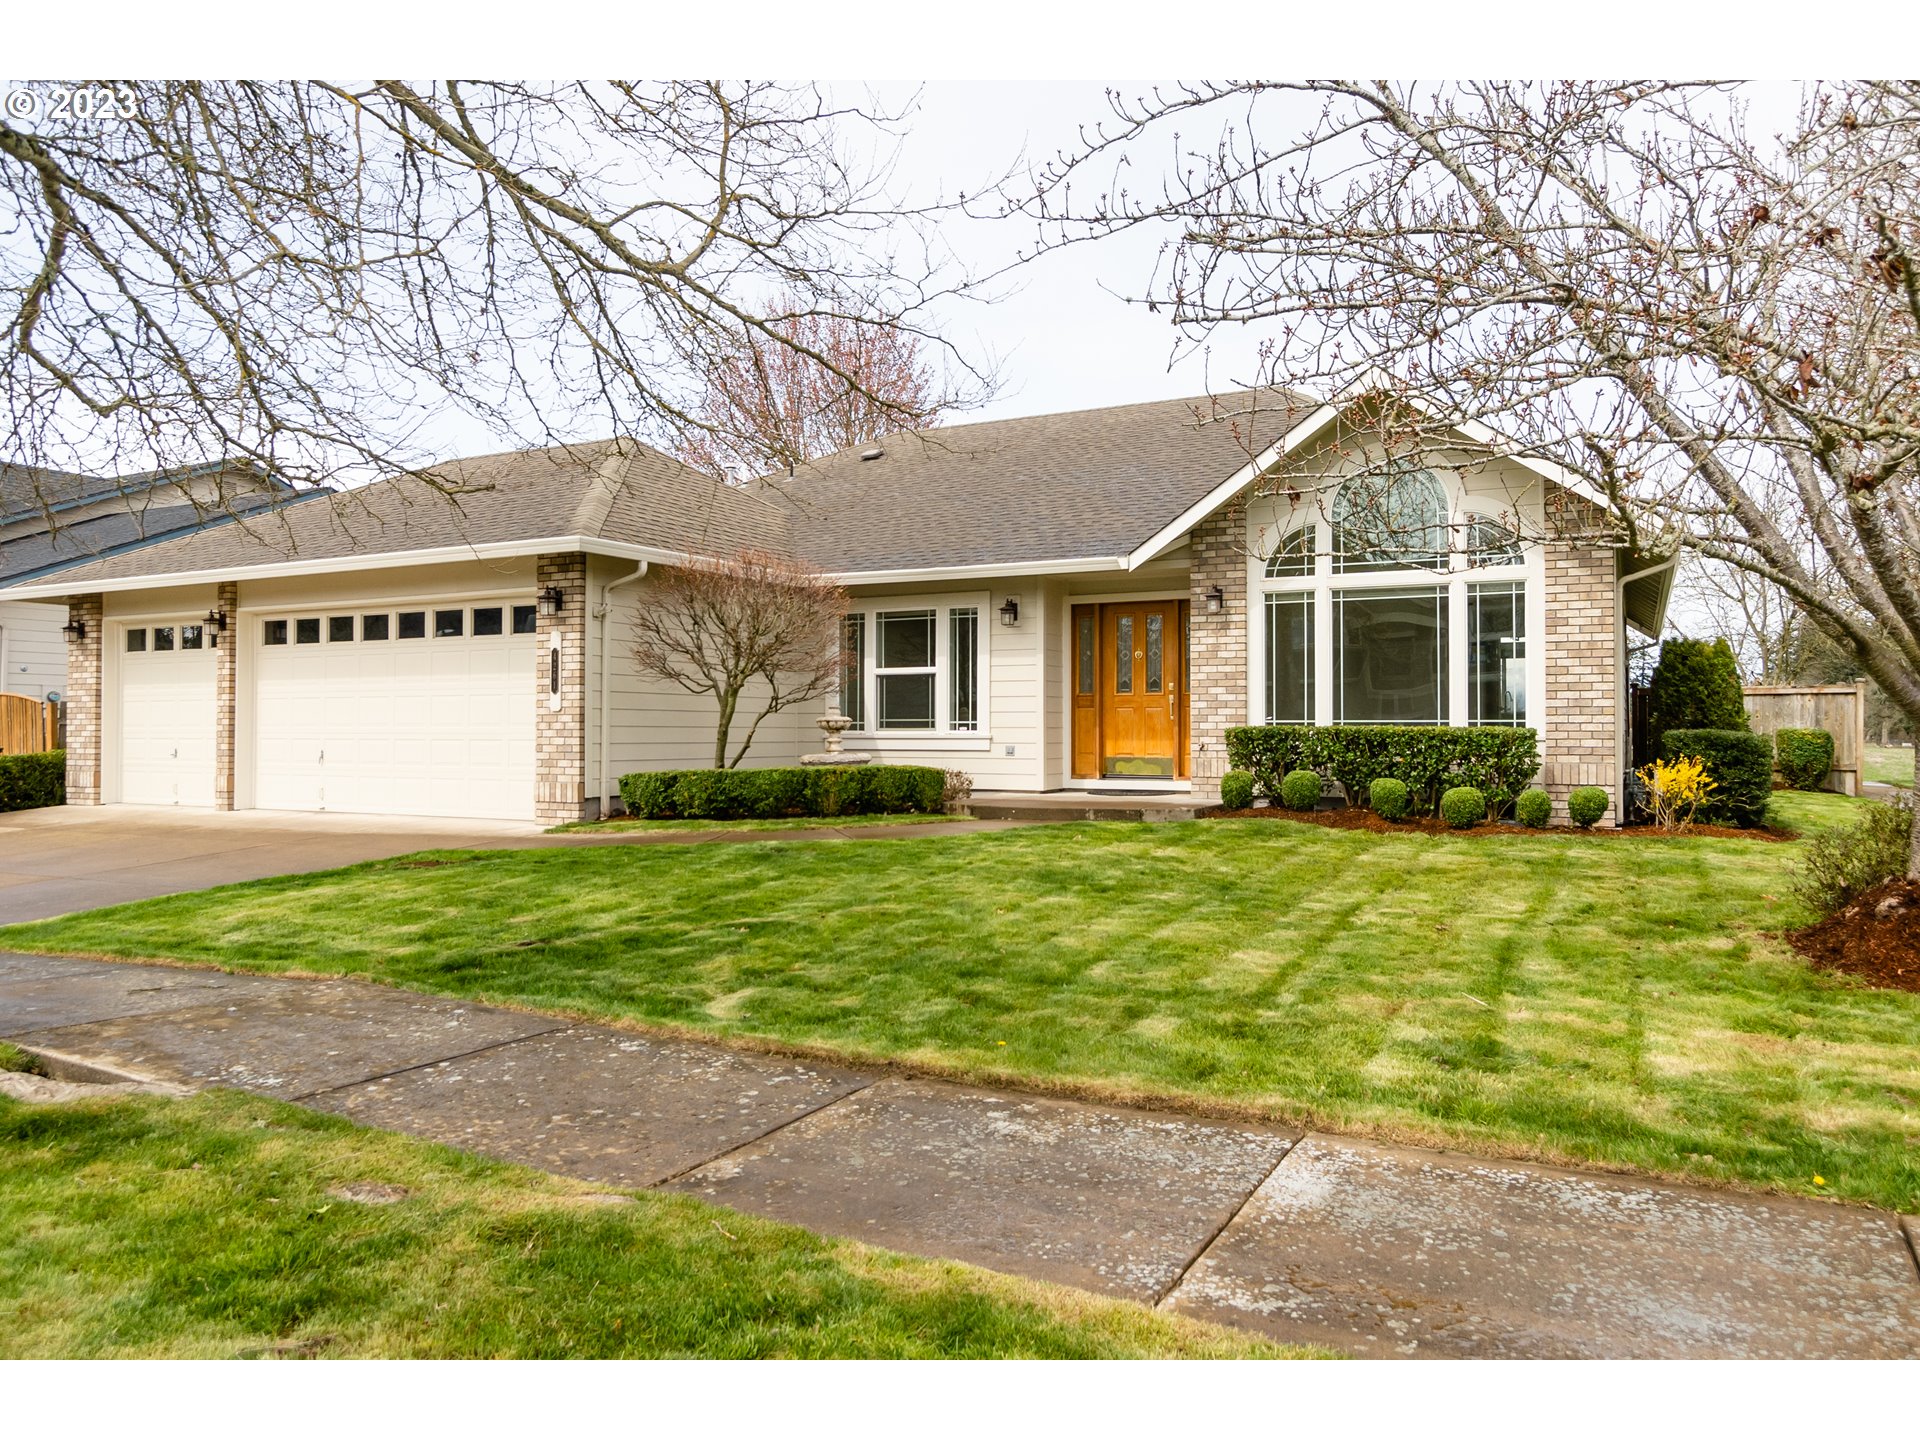 4261 HYACINTH ST Eugene Home Listings - Galand Haas Real Estate